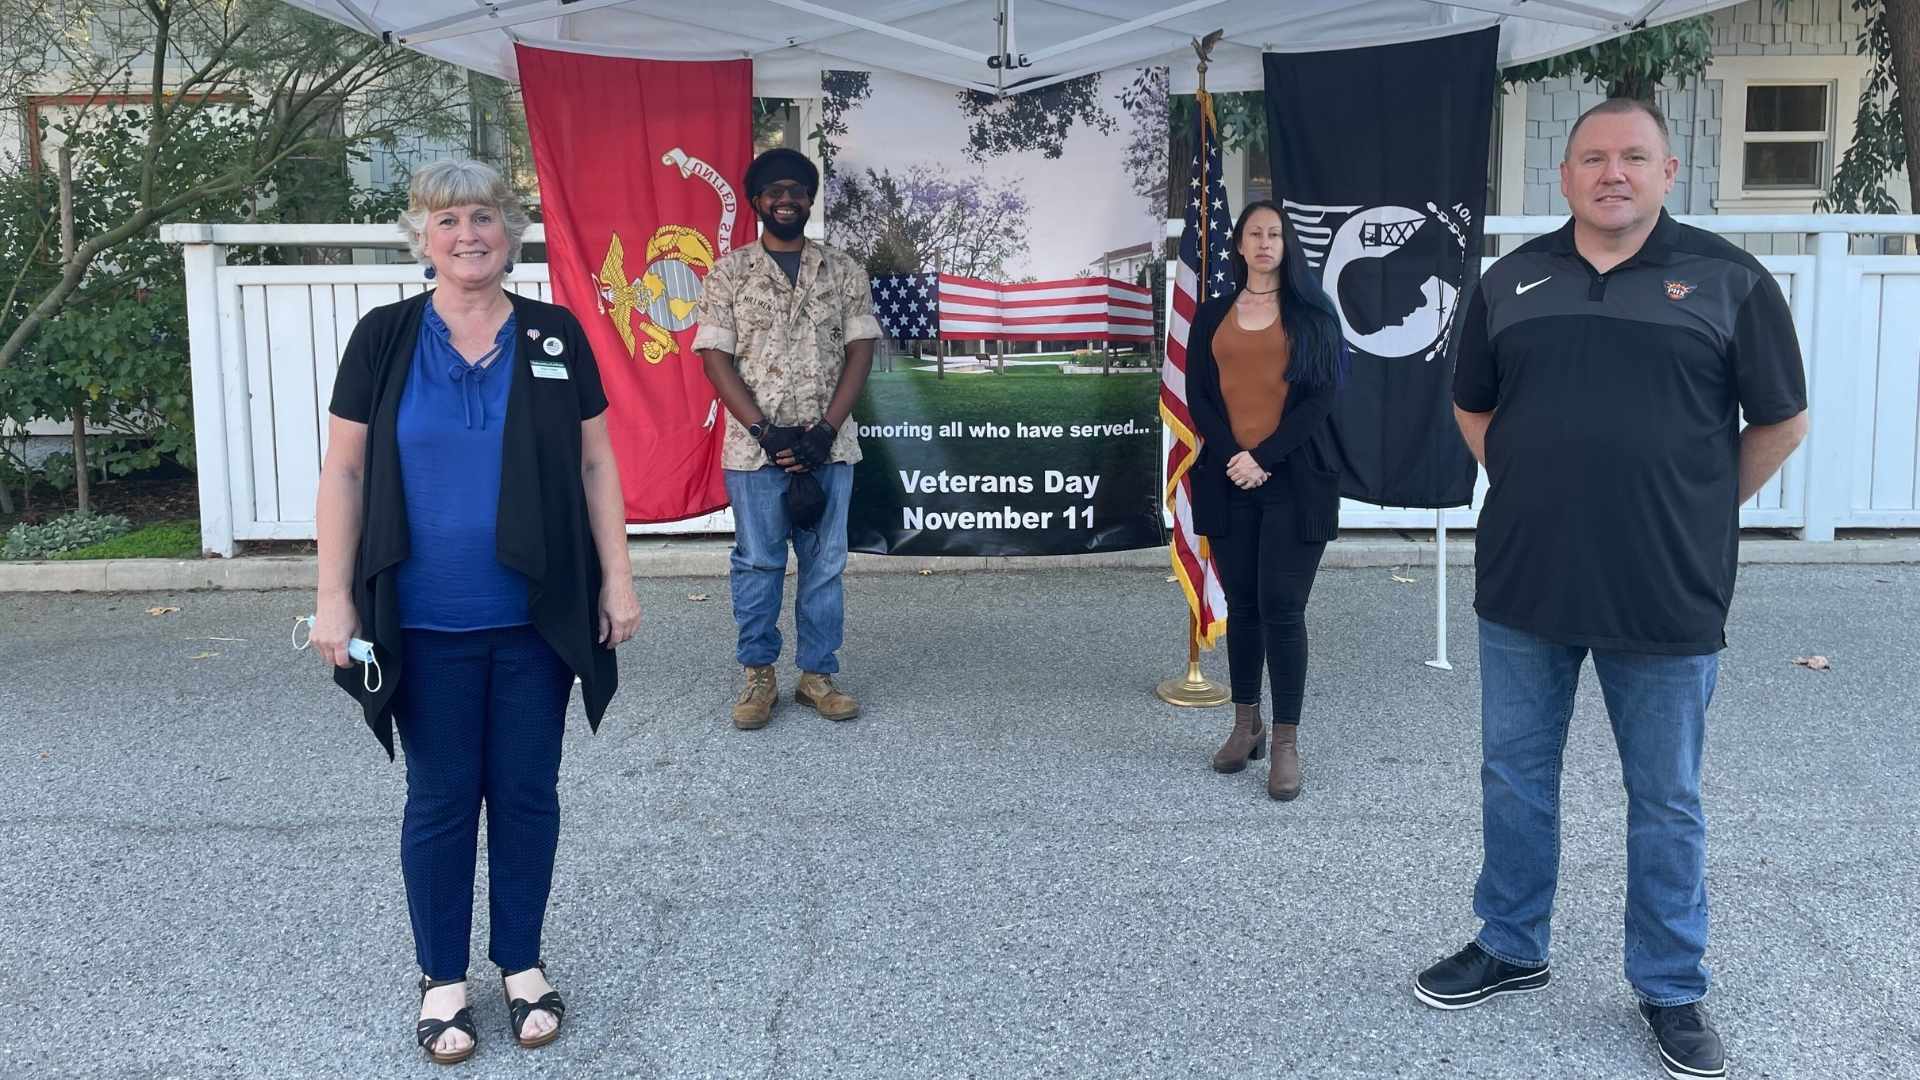 Four military veterans standing next to American flag and military flags with Veterans Day signage at the University of La Verne